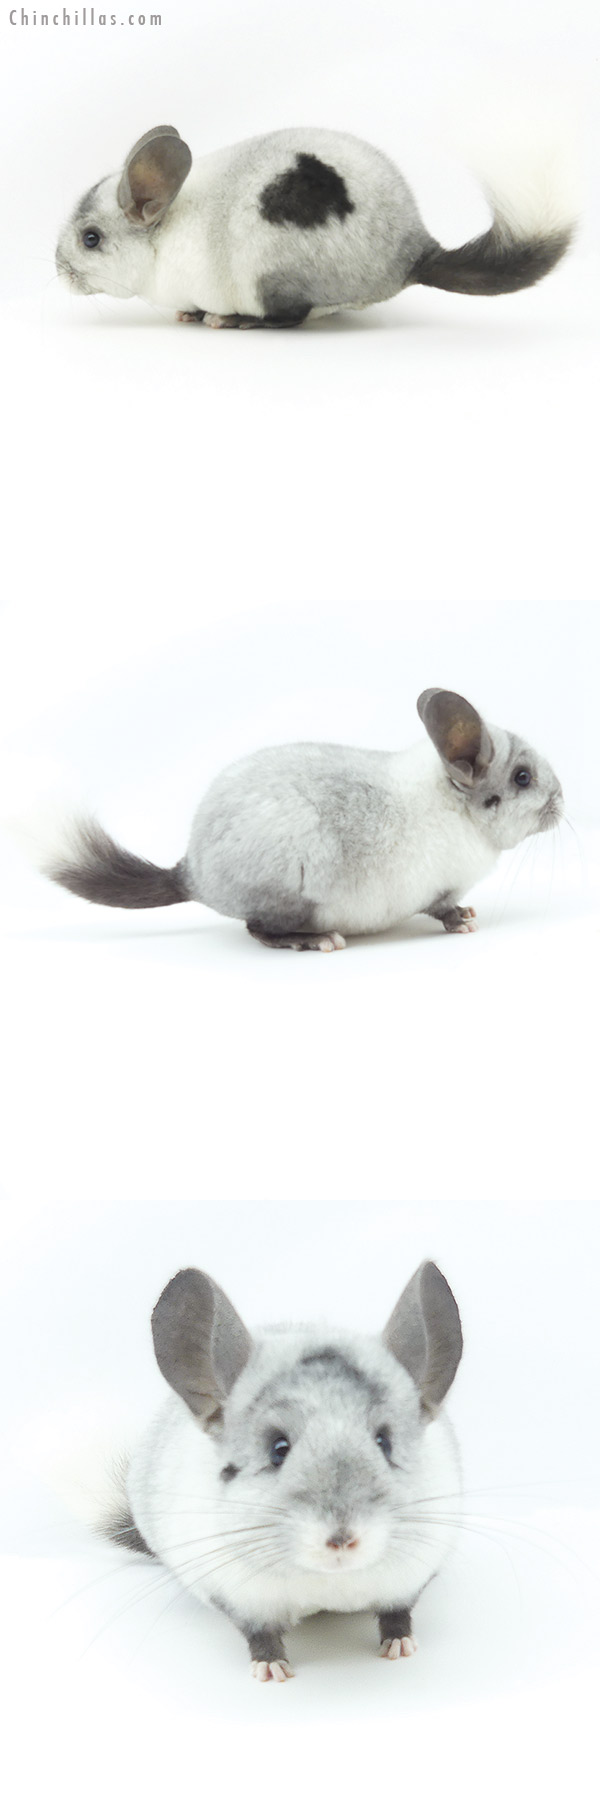 Chinchilla or related item offered for sale or export on Chinchillas.com - 19375 Extreme Ebony & White Mosaic ( Locken Carrier ) Male Chinchilla